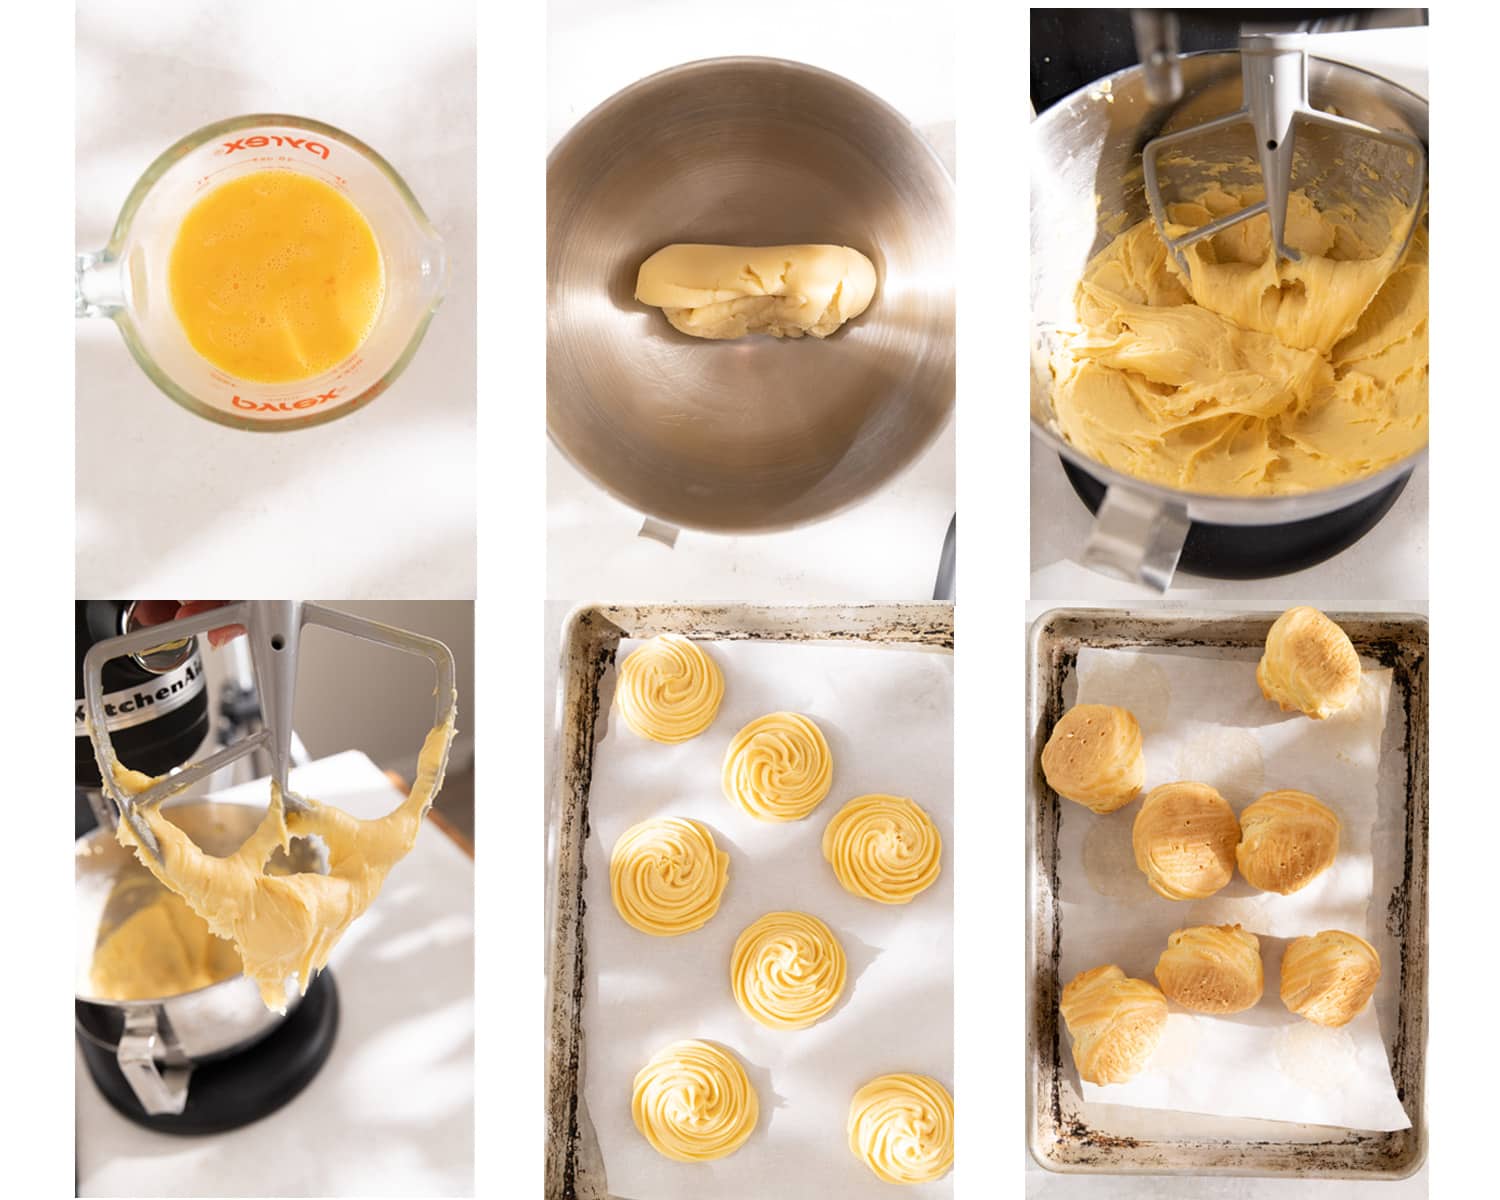 The process of making, piping and baking choux pastry to make windbeutel. 